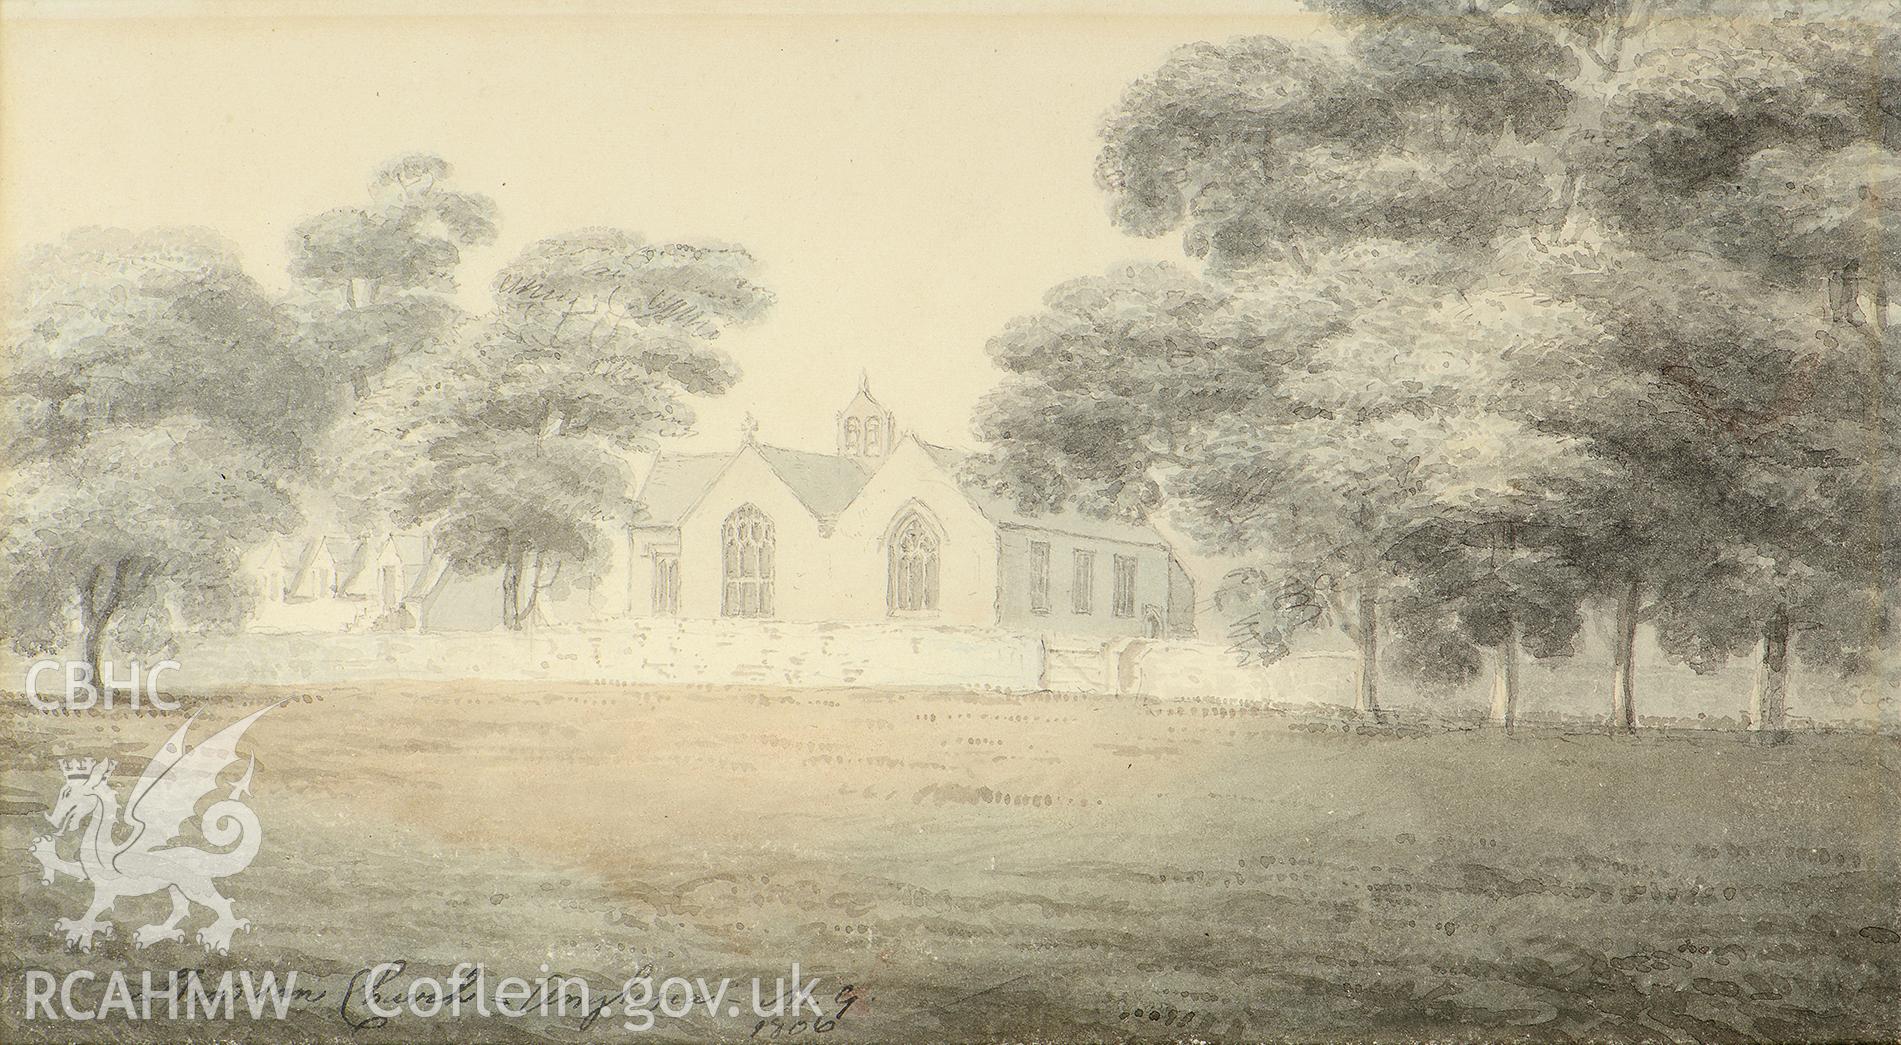 Digital scan of a watercolour of St Nidan, Llanidan by Moses Griffith, 1806.